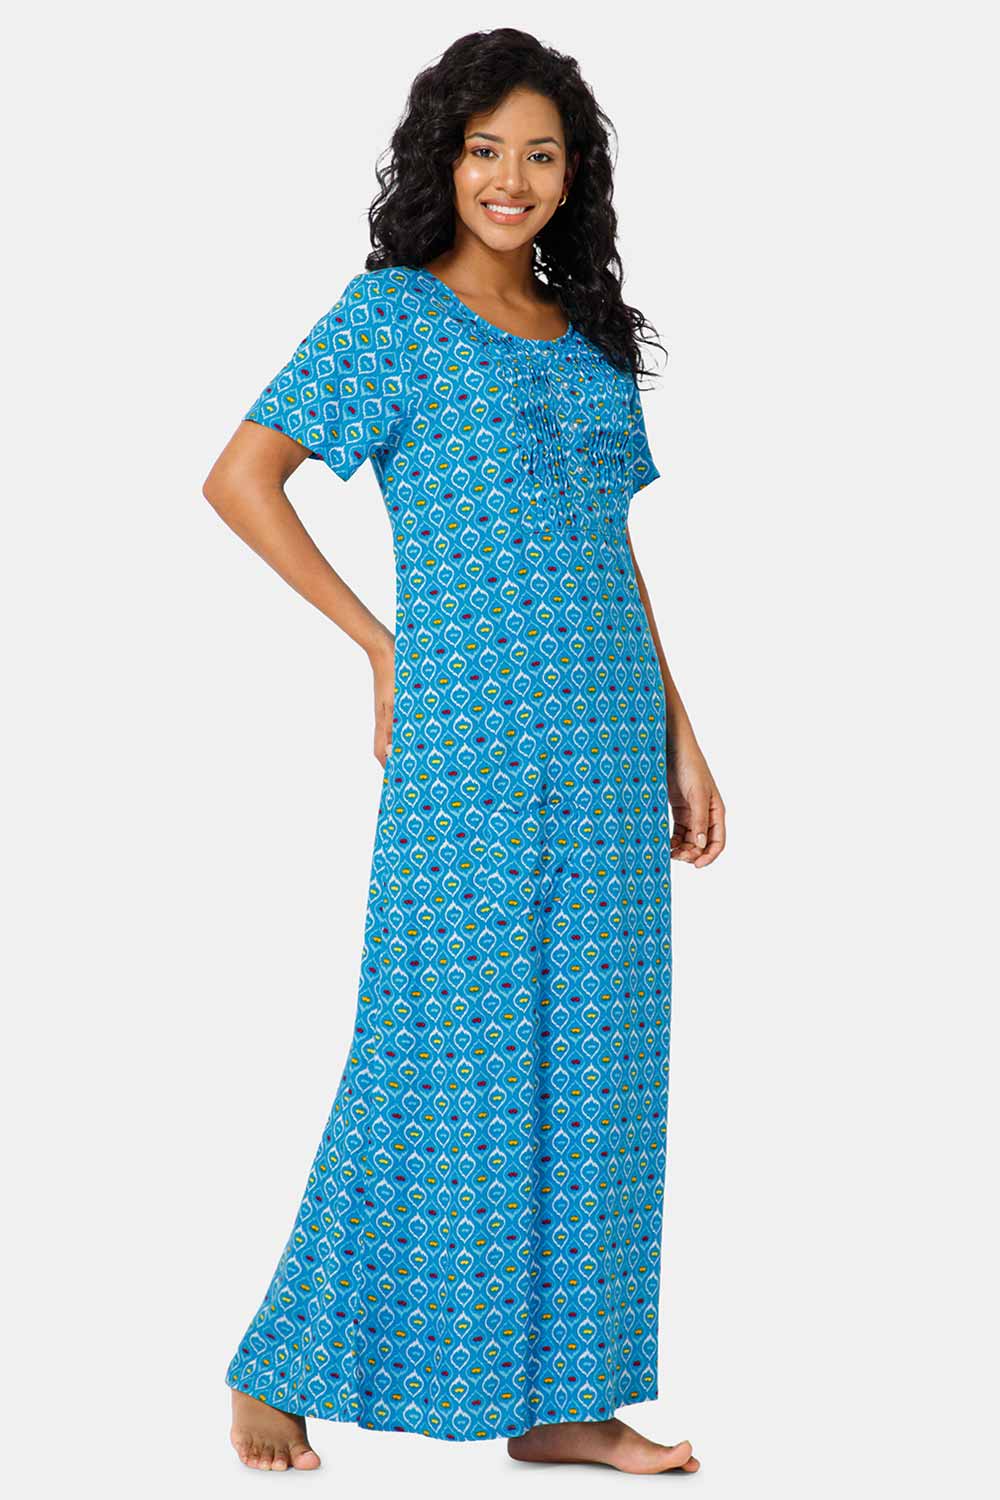 Naidu Hall Front Open Round Neck Short Sleeve Printed Nighty-Blue - NT52